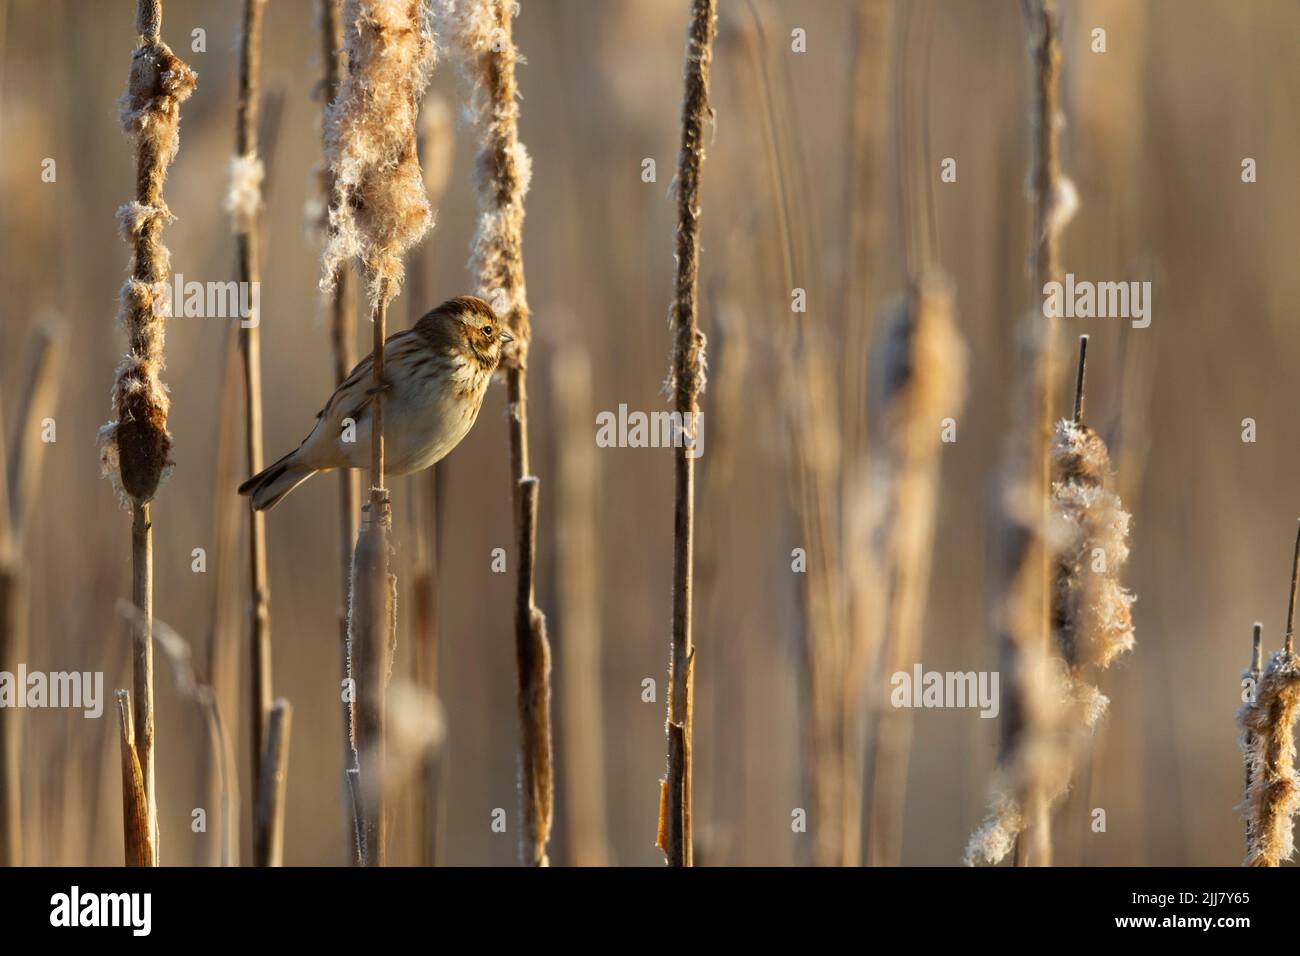 Common reed bunting Emberiza schoeniclus, adult female perched on Common bulrush Typha latifolia, Weston-Super-Mare, Somerset, UK, March Stock Photo